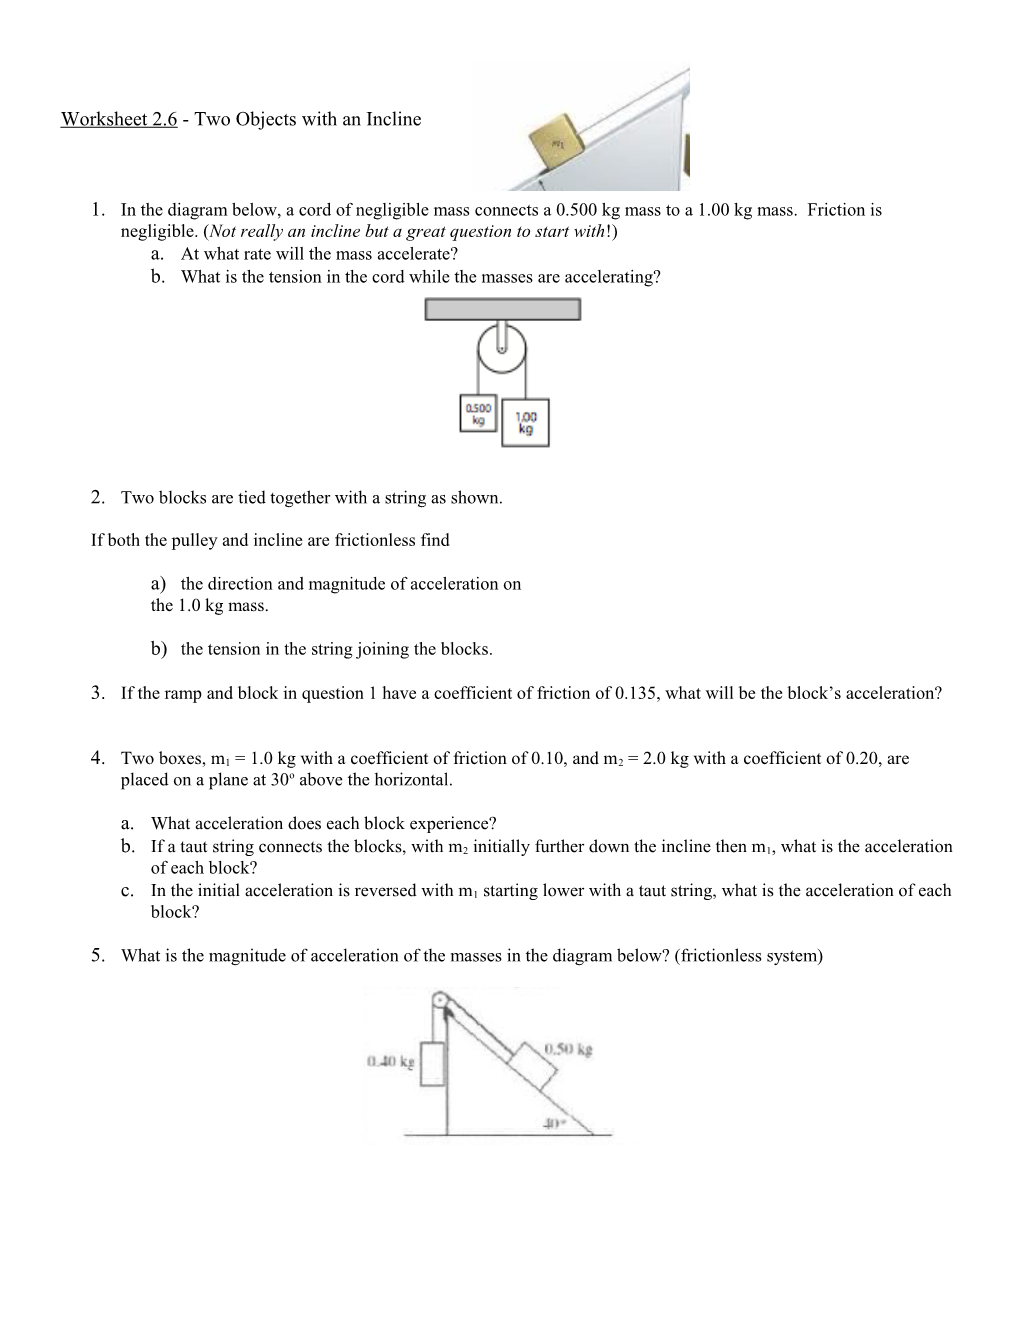 Worksheet 2.6 - Two Objects with an Incline